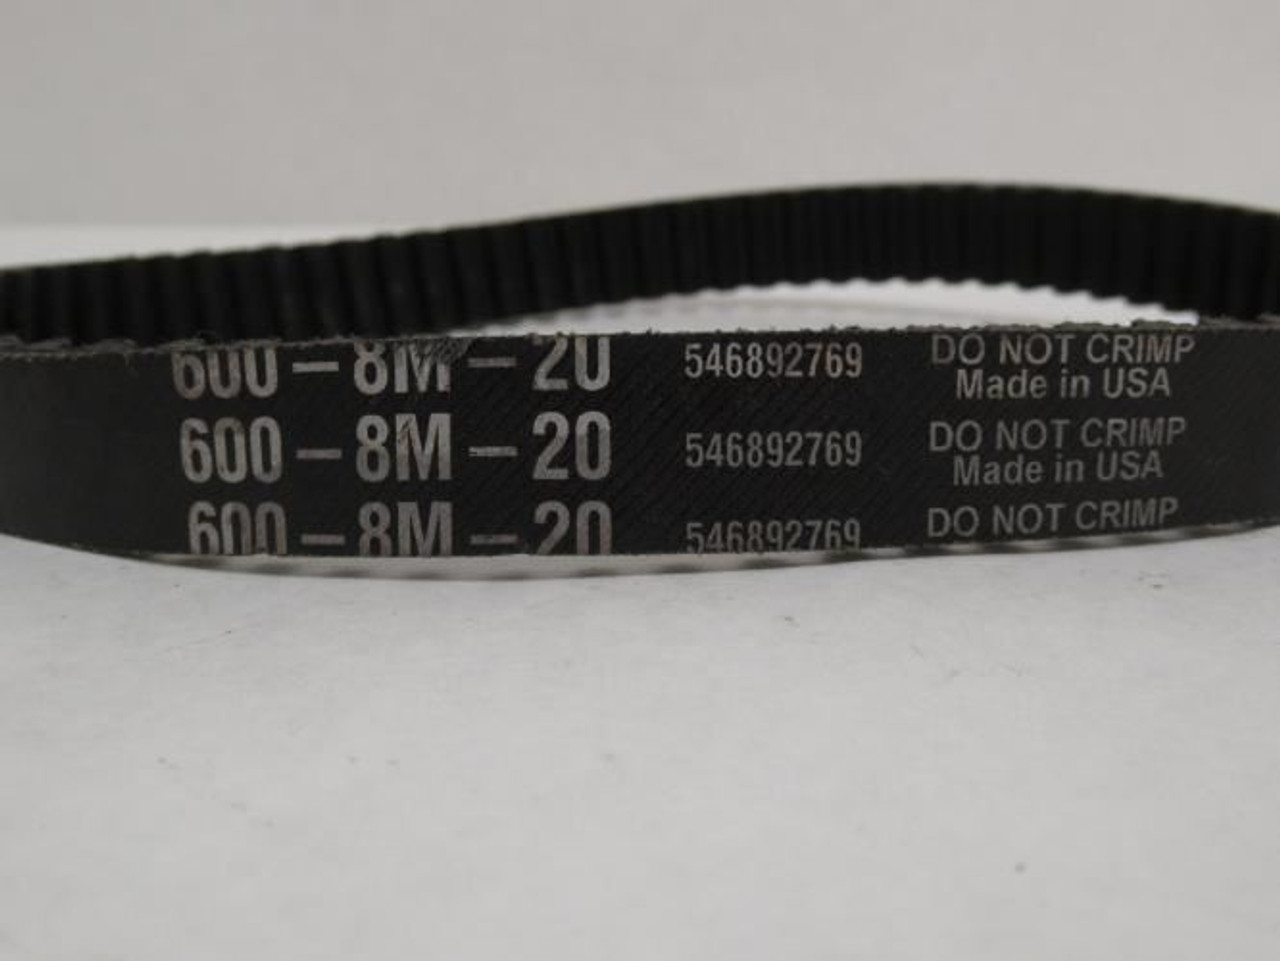 Continental 600-8M-20; Synchronous Timing Belt 600mm L x 20mm W